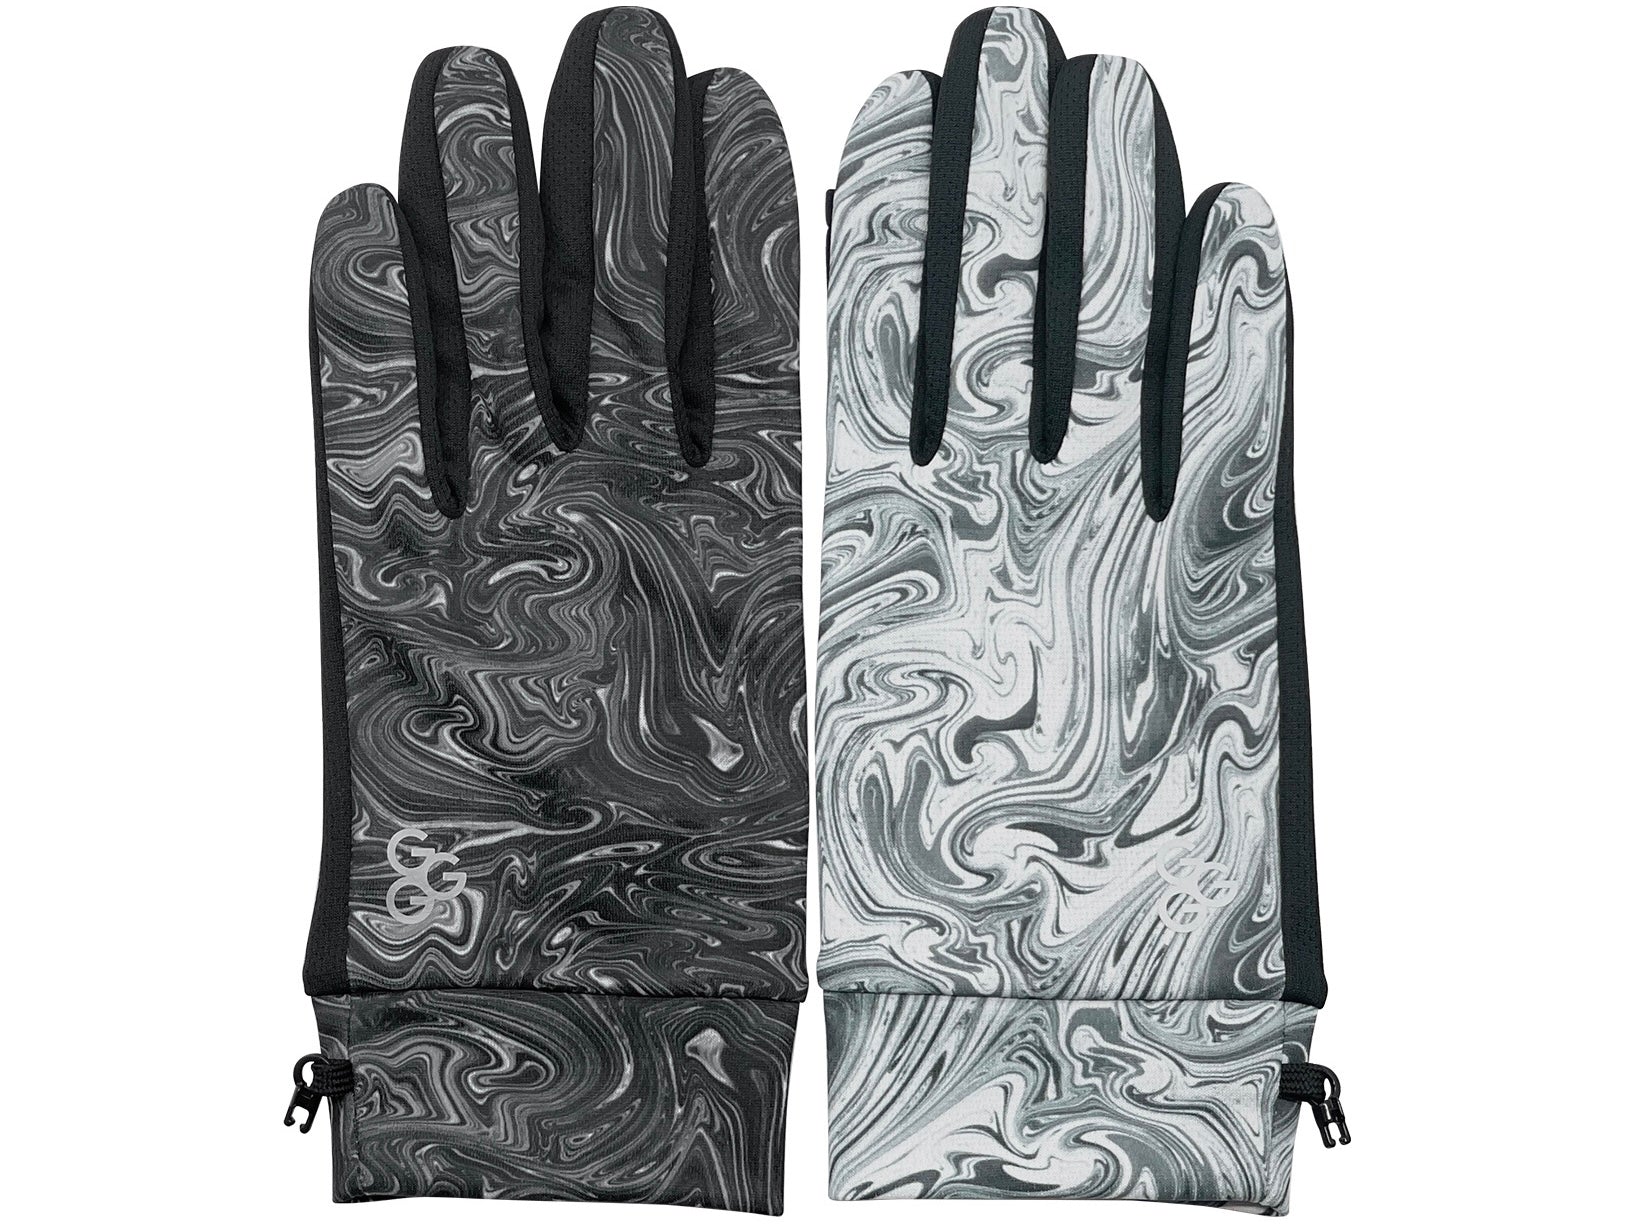 ［P.O.GLOVES］graphic 2.0：marble-mix